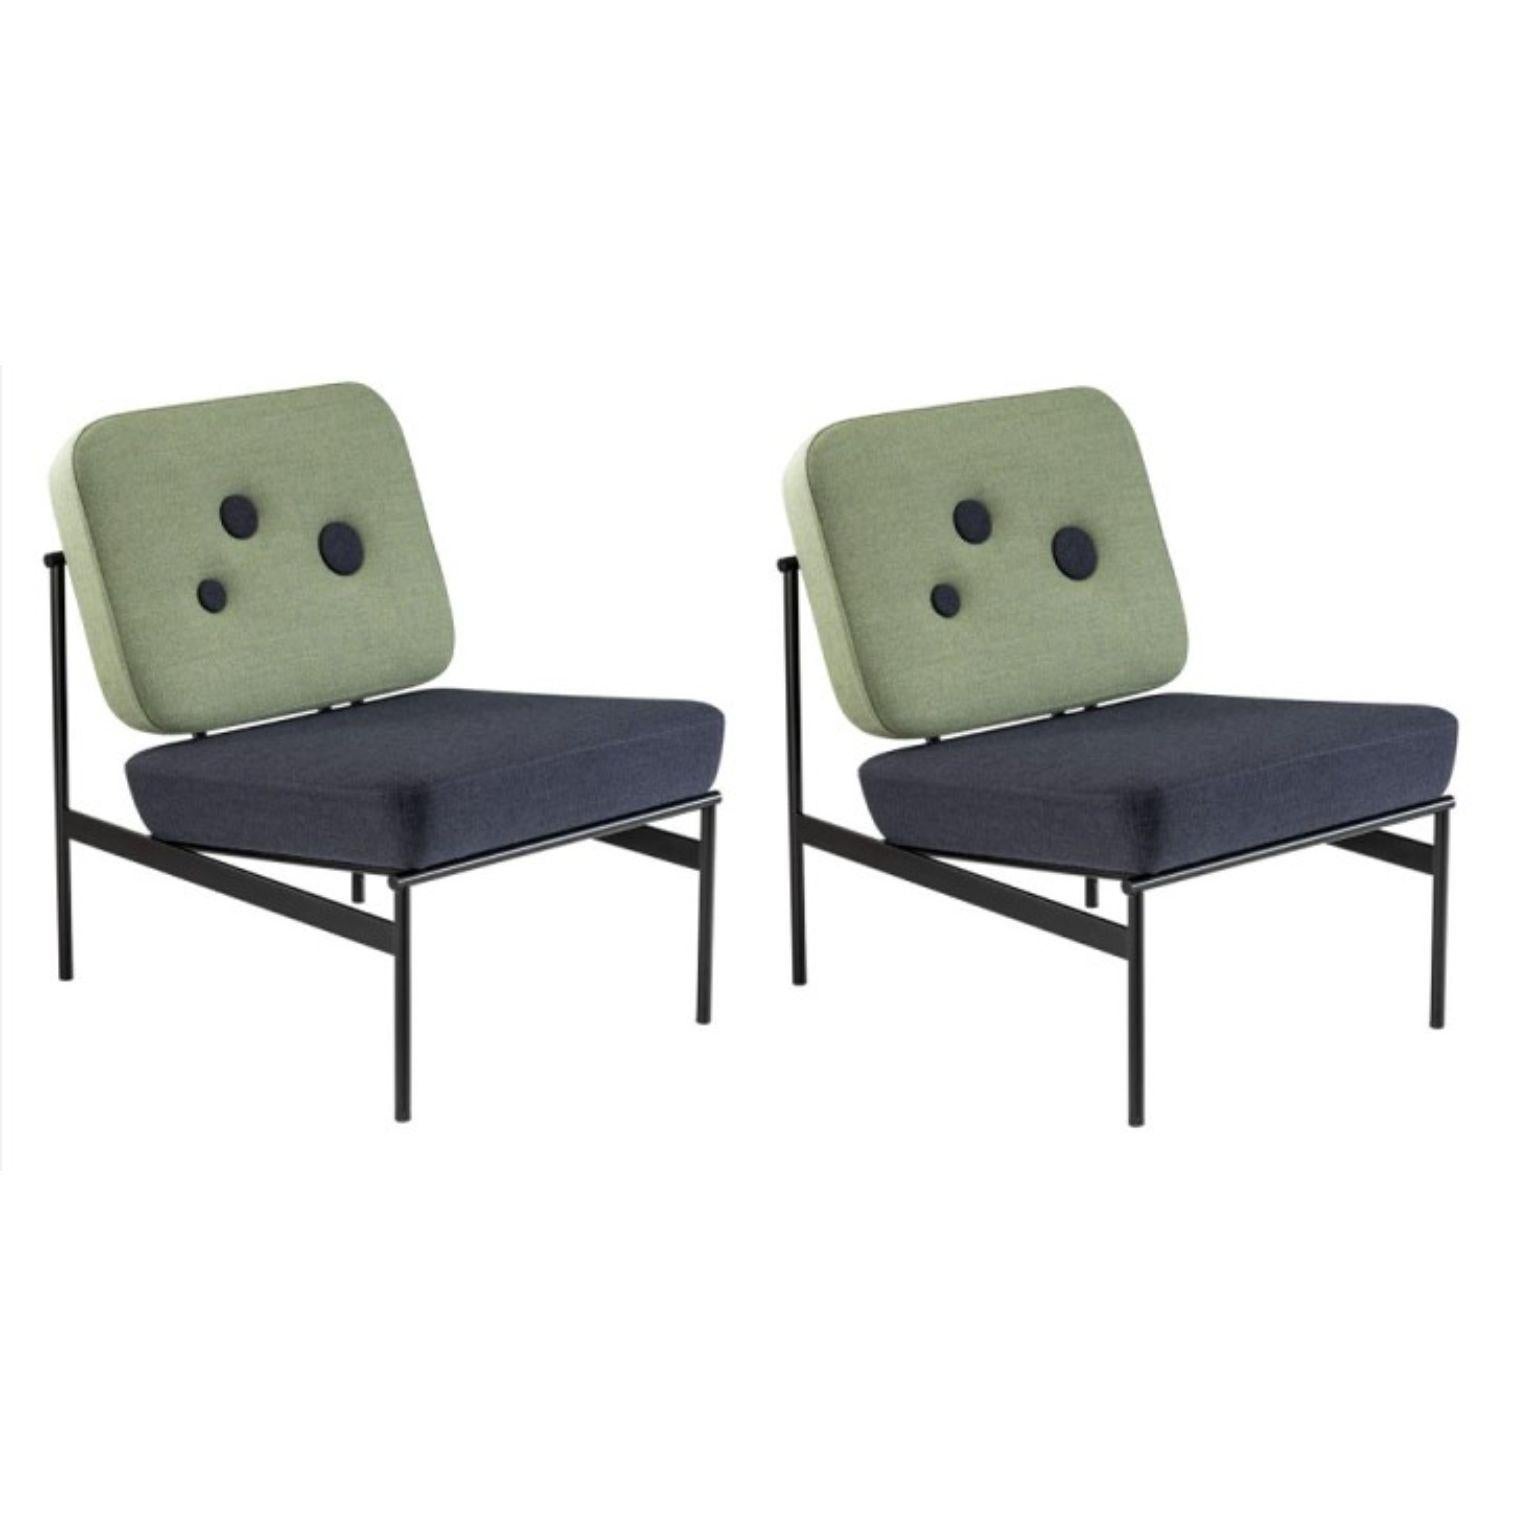 Set of 2 dapple lounge chairs by Edvin Klasson
Dimensions: D55 x W74 x H78 cm
Materials: powder coated steel, wooden frame with steel springs, cold foam and upholstery.
Options: The textile can be any upholstery textile from Kvadrat and the seat